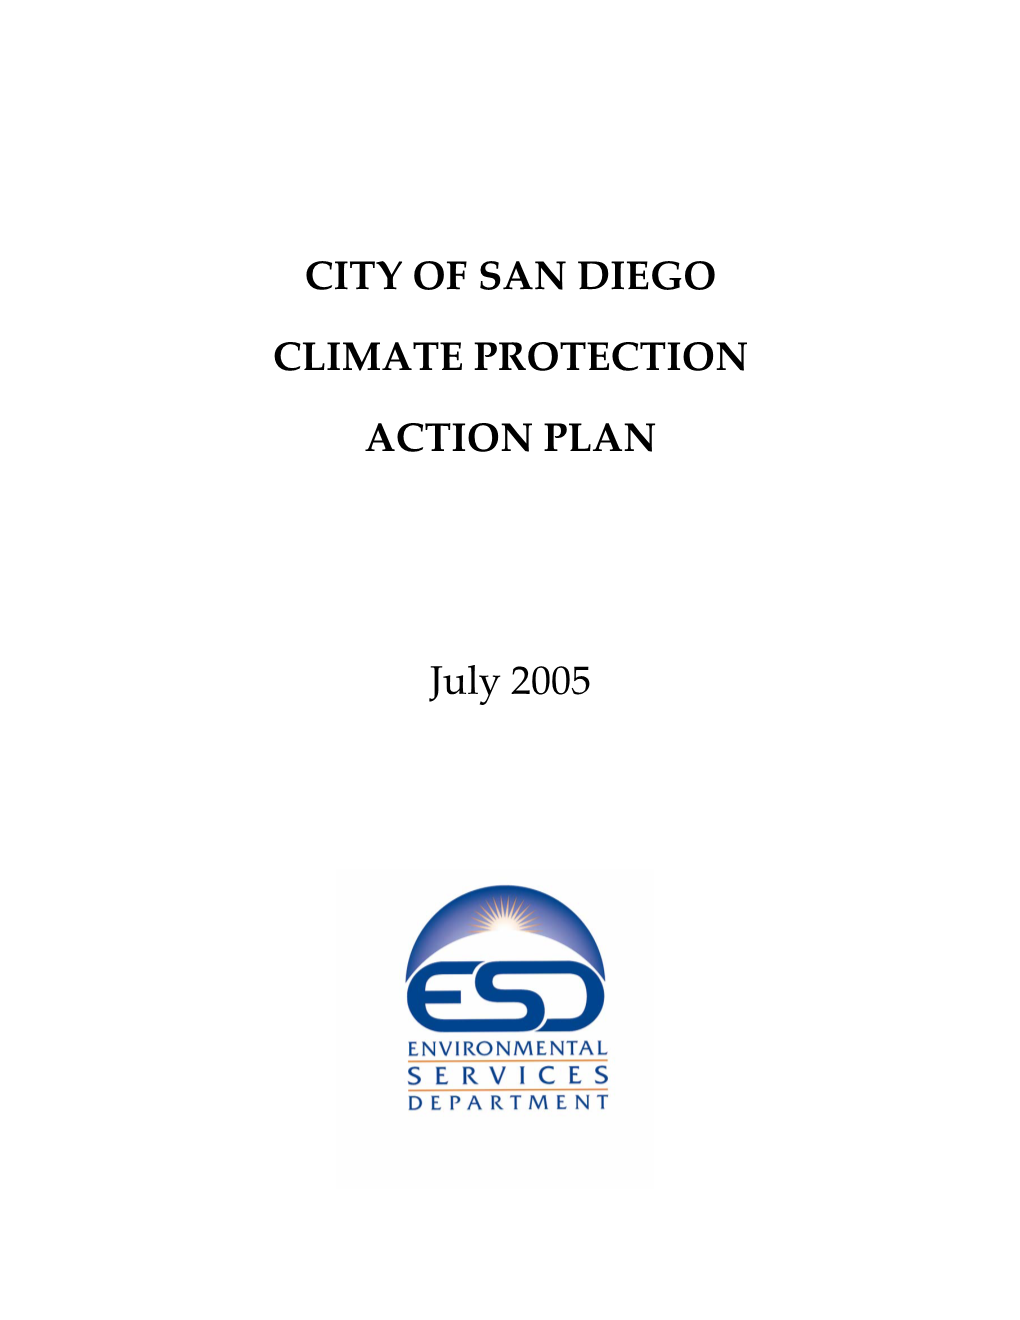 San Diego Climate Protection